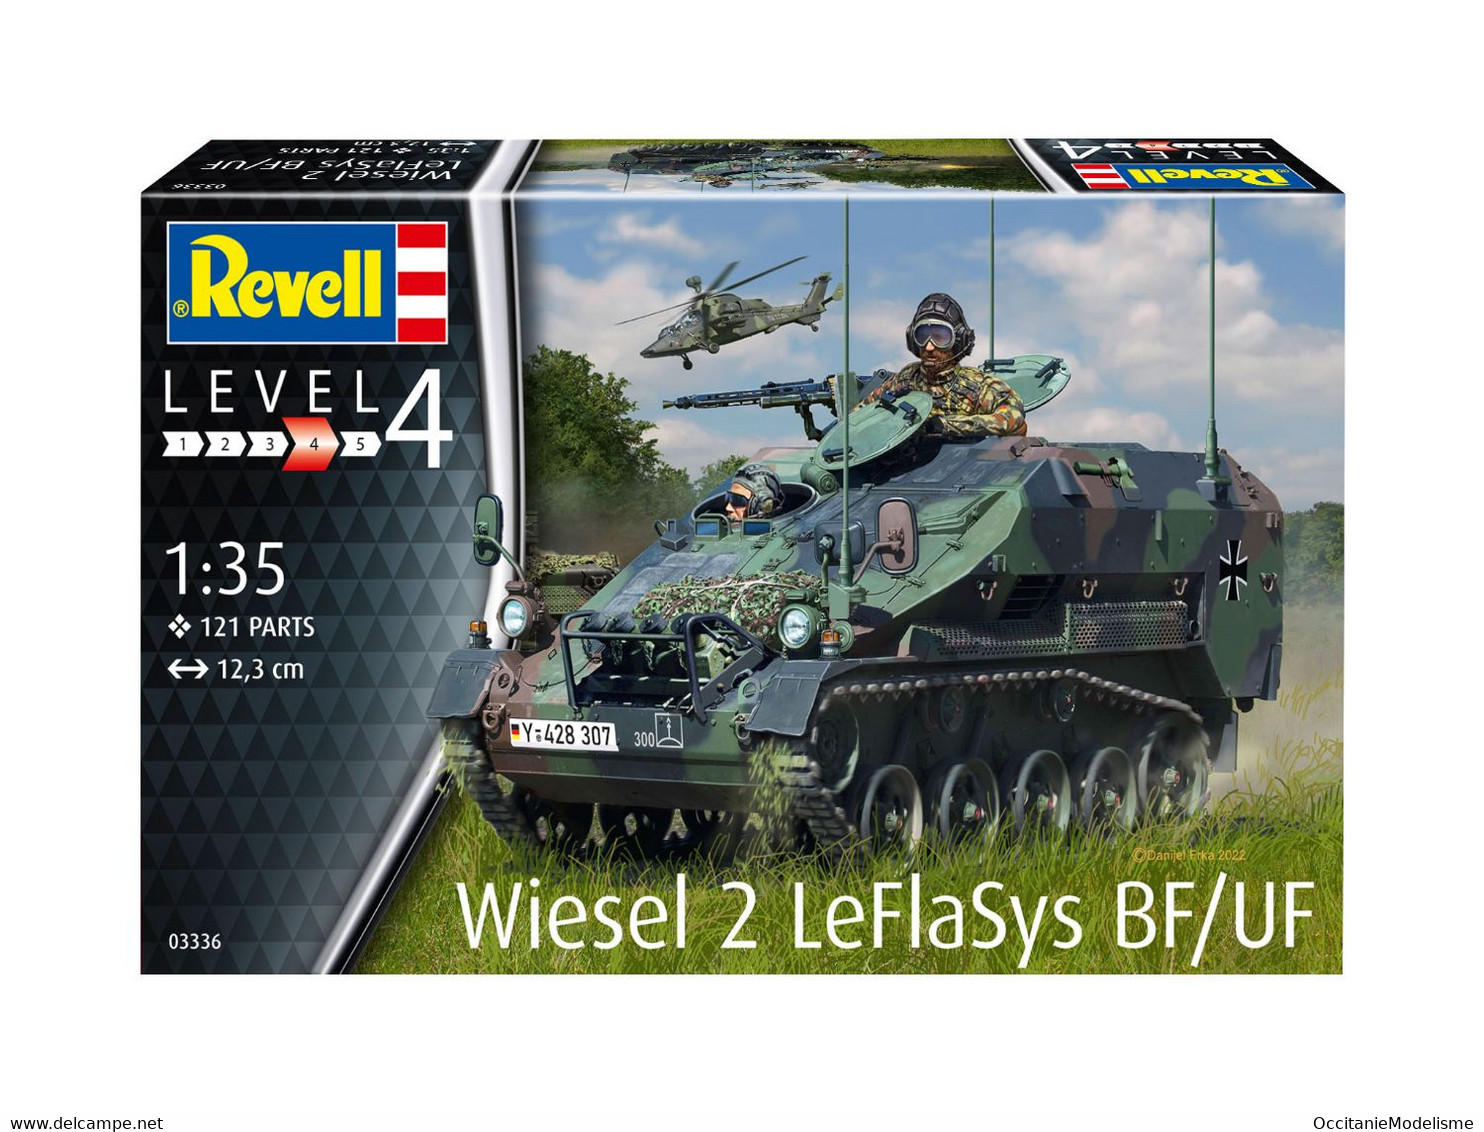 Revell - CHAR WIESEL 2 LeFlaSys BF/UF maquette militaire kit plastique réf. 03336 Neuf NBO 1/35